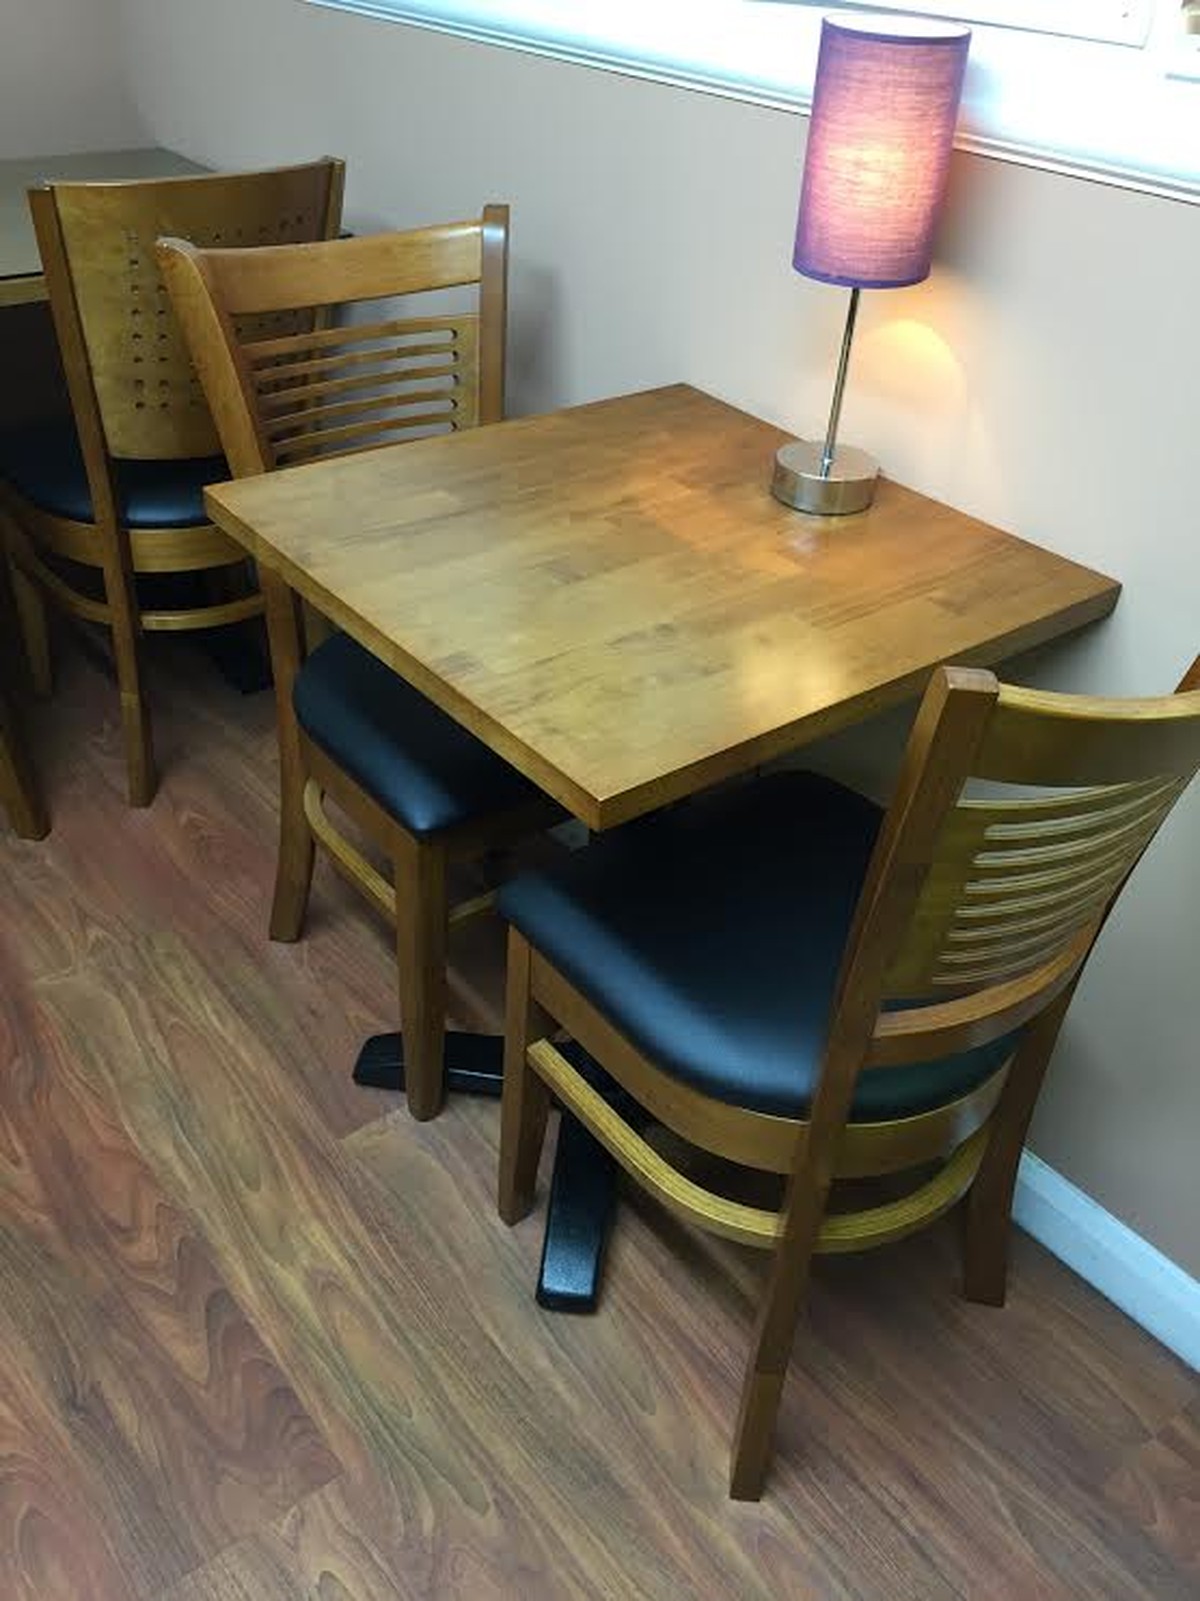 Secondhand Chairs and Tables | Restaurant or Cafe Tables ...